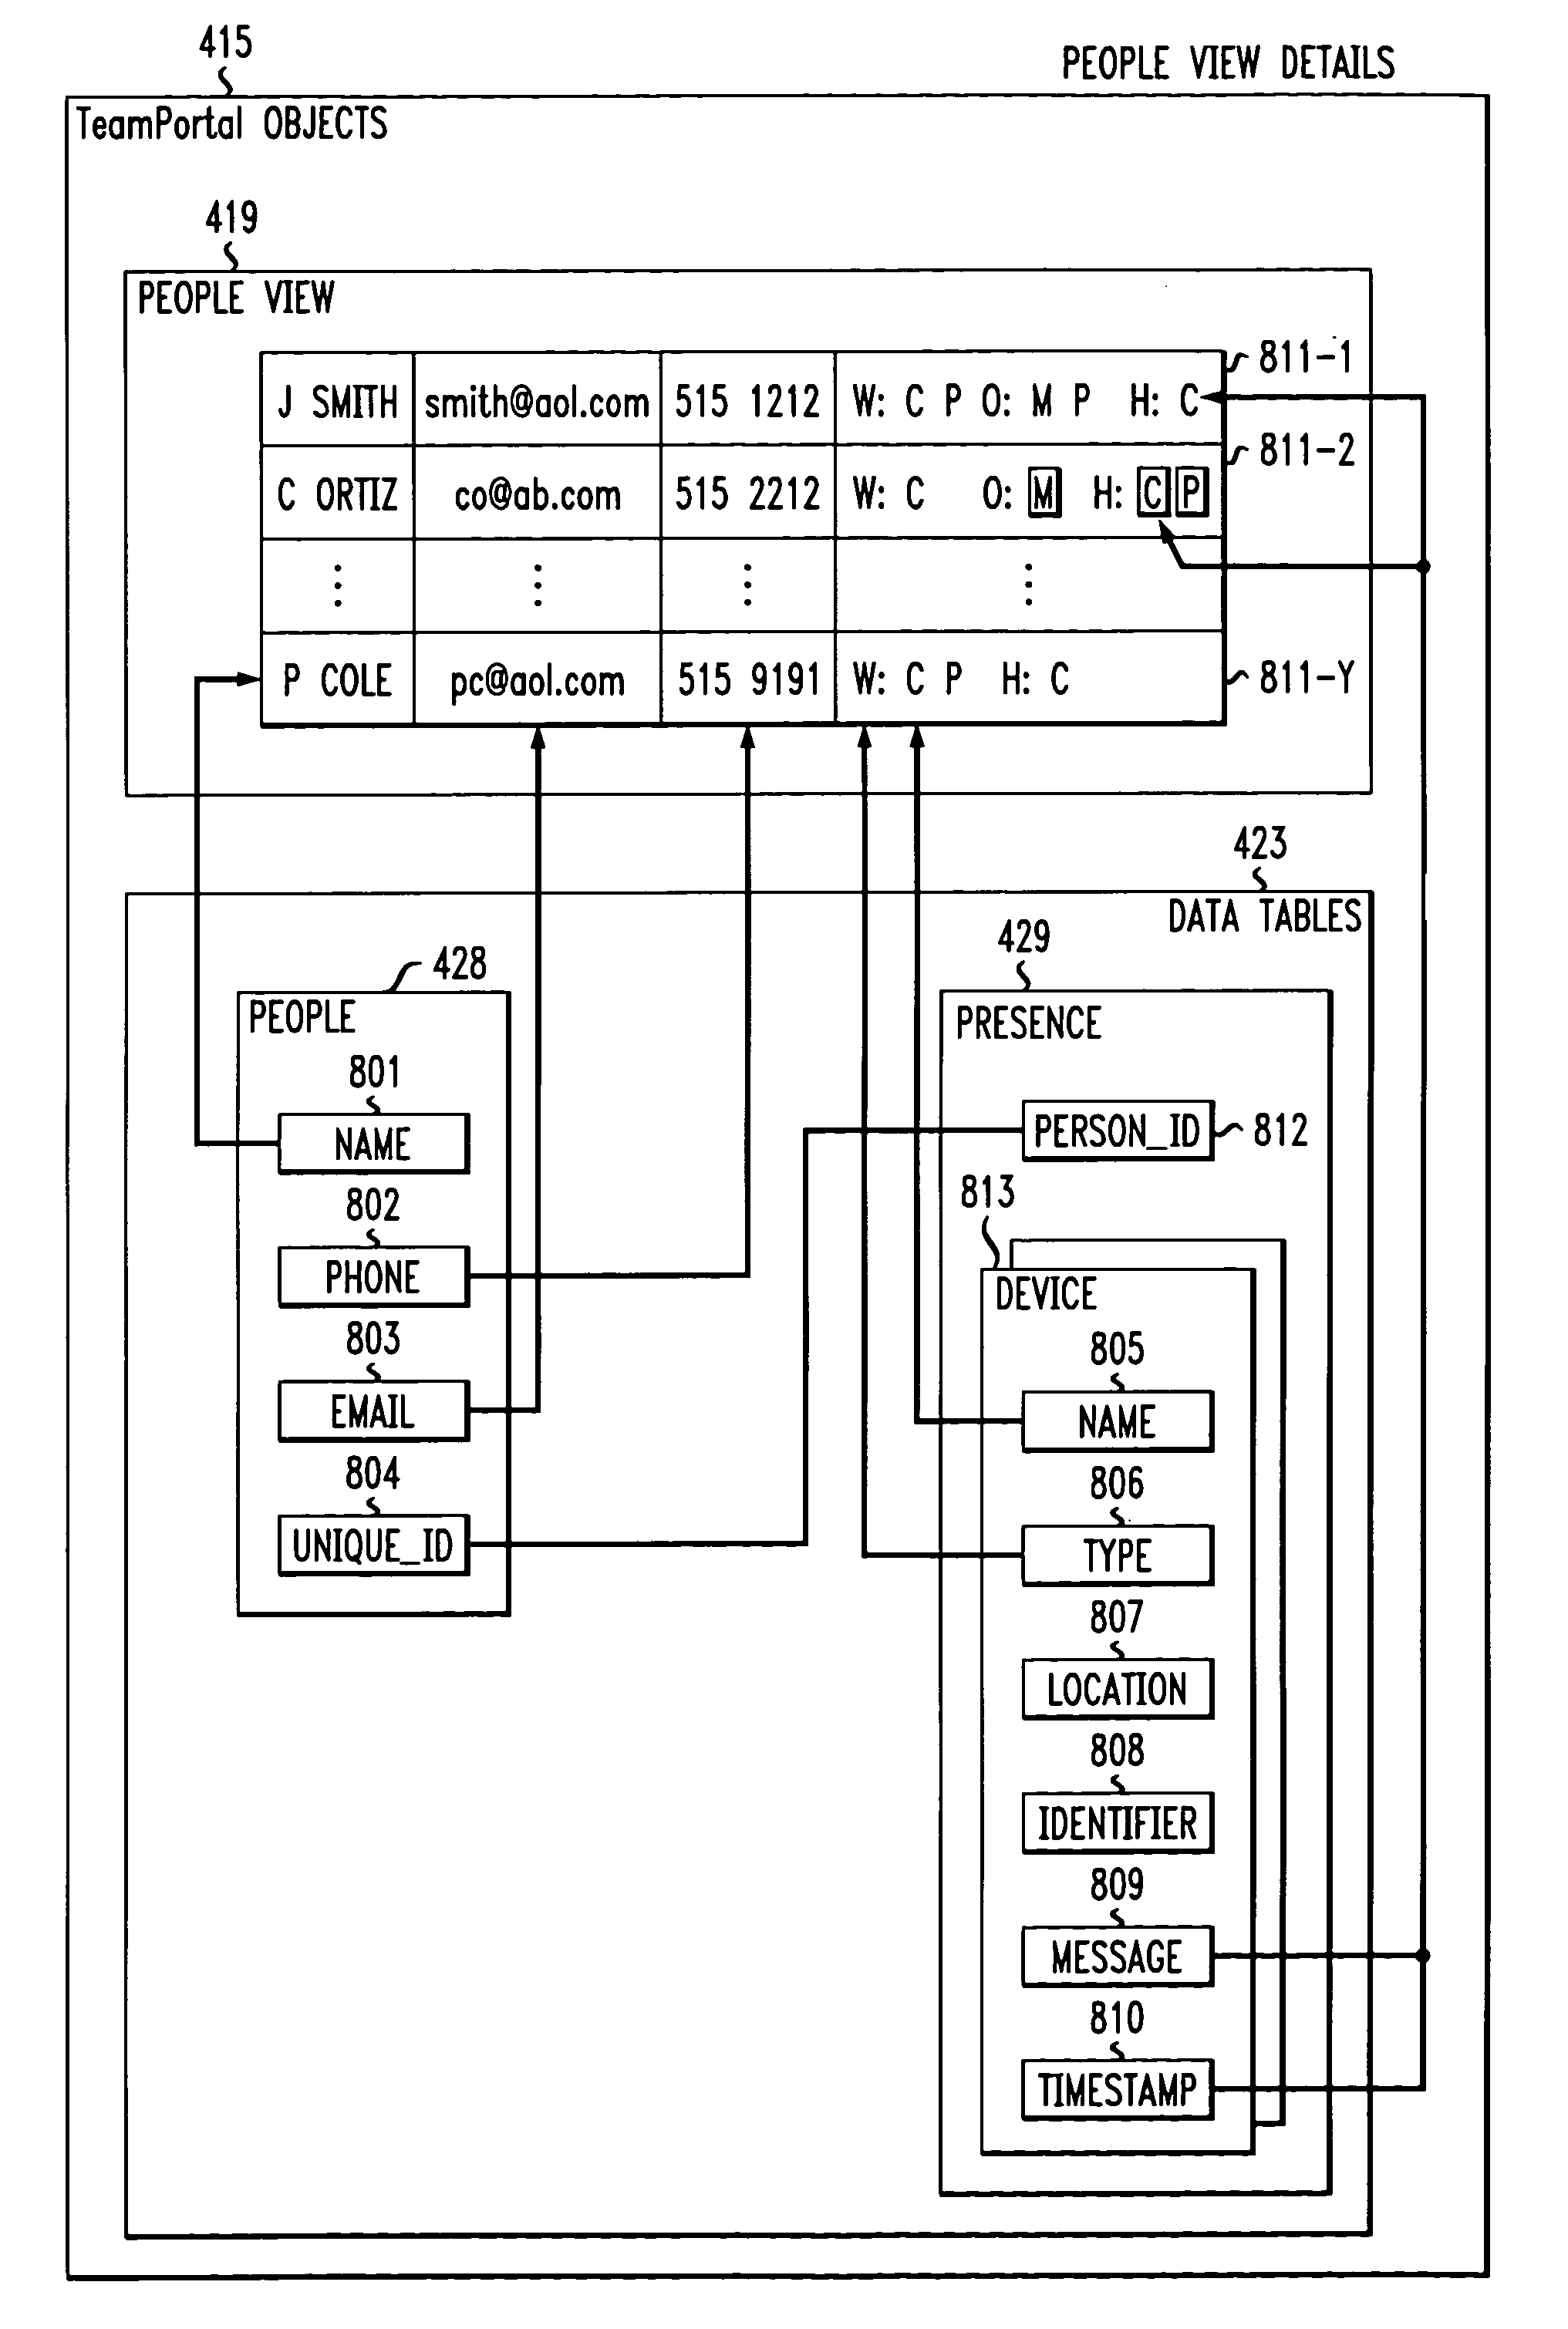 Apparatus and method for use in a data/conference call system for automatically collecting participant information and providing all participants with that information for use in collaboration services